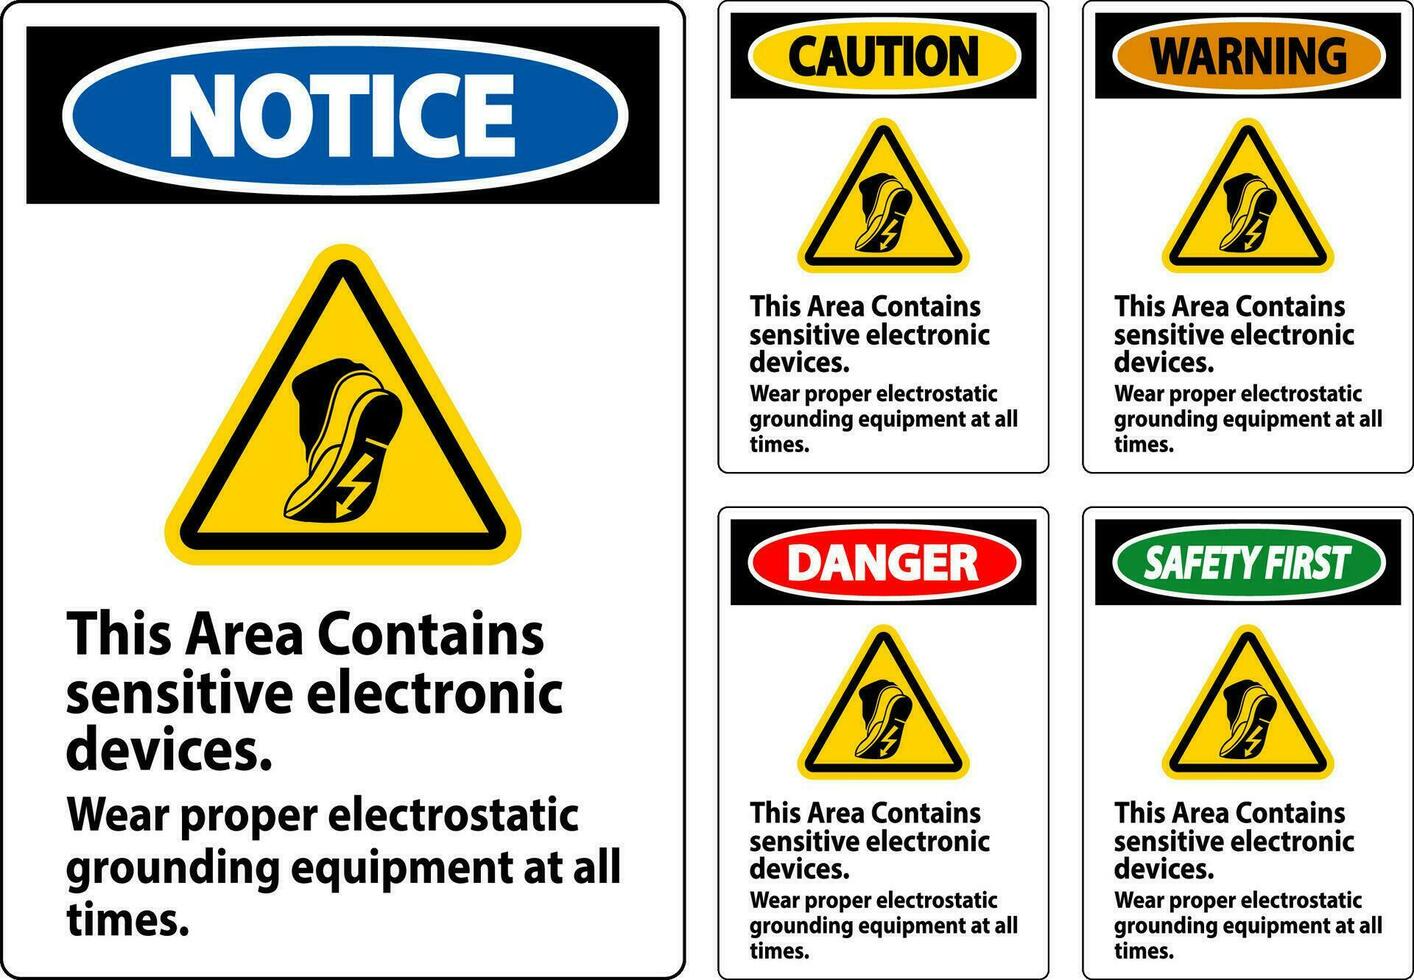 Caution Sign This Area Contains Sensitive Electronic Devices, Wear Proper Electrostatic Grounding Equipment At All Times vector